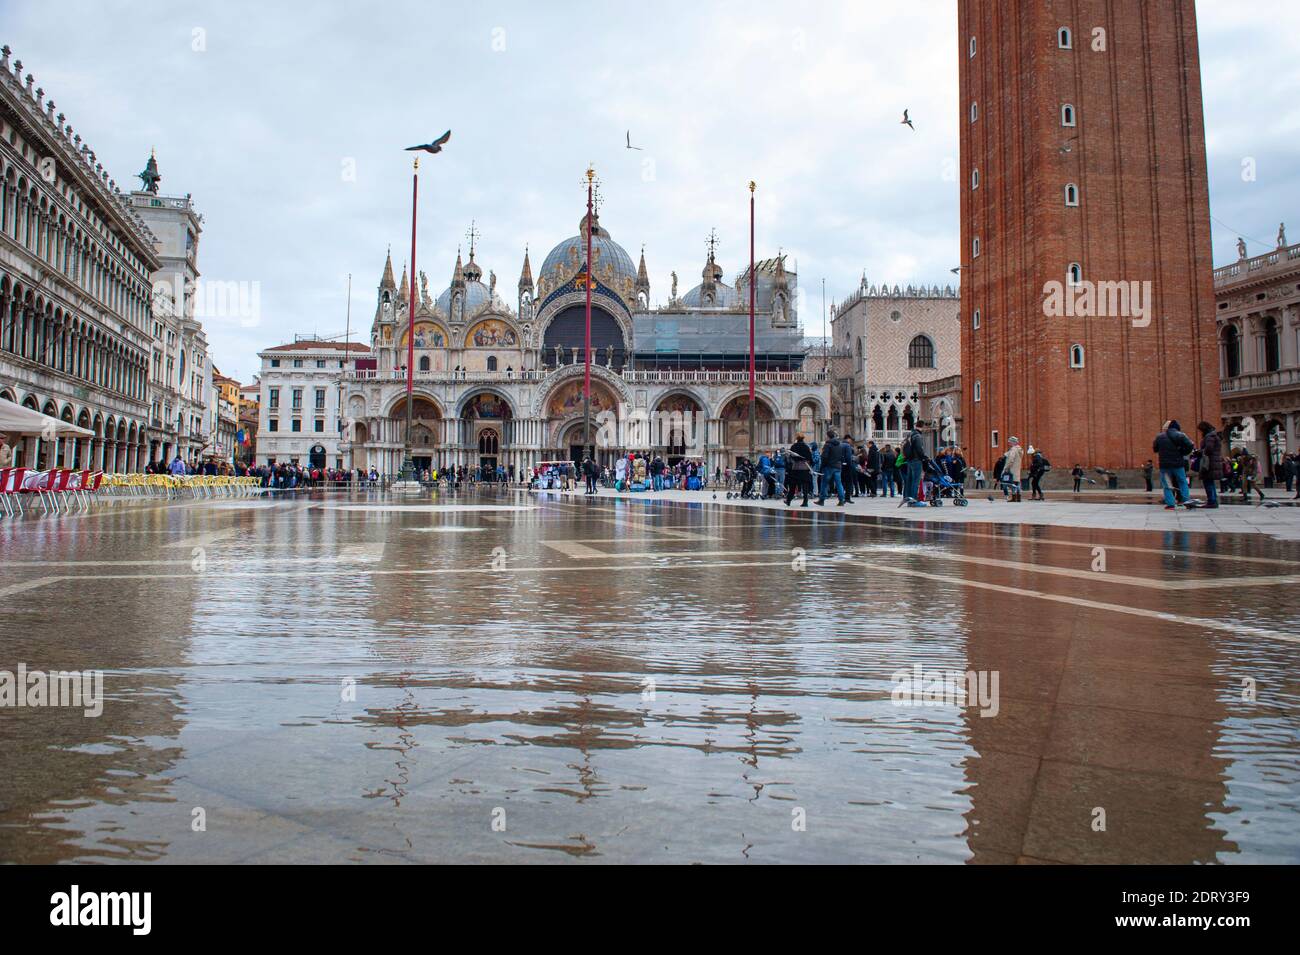 St. Mark's Square flooded by high tide. Venice, Italy Stock Photo